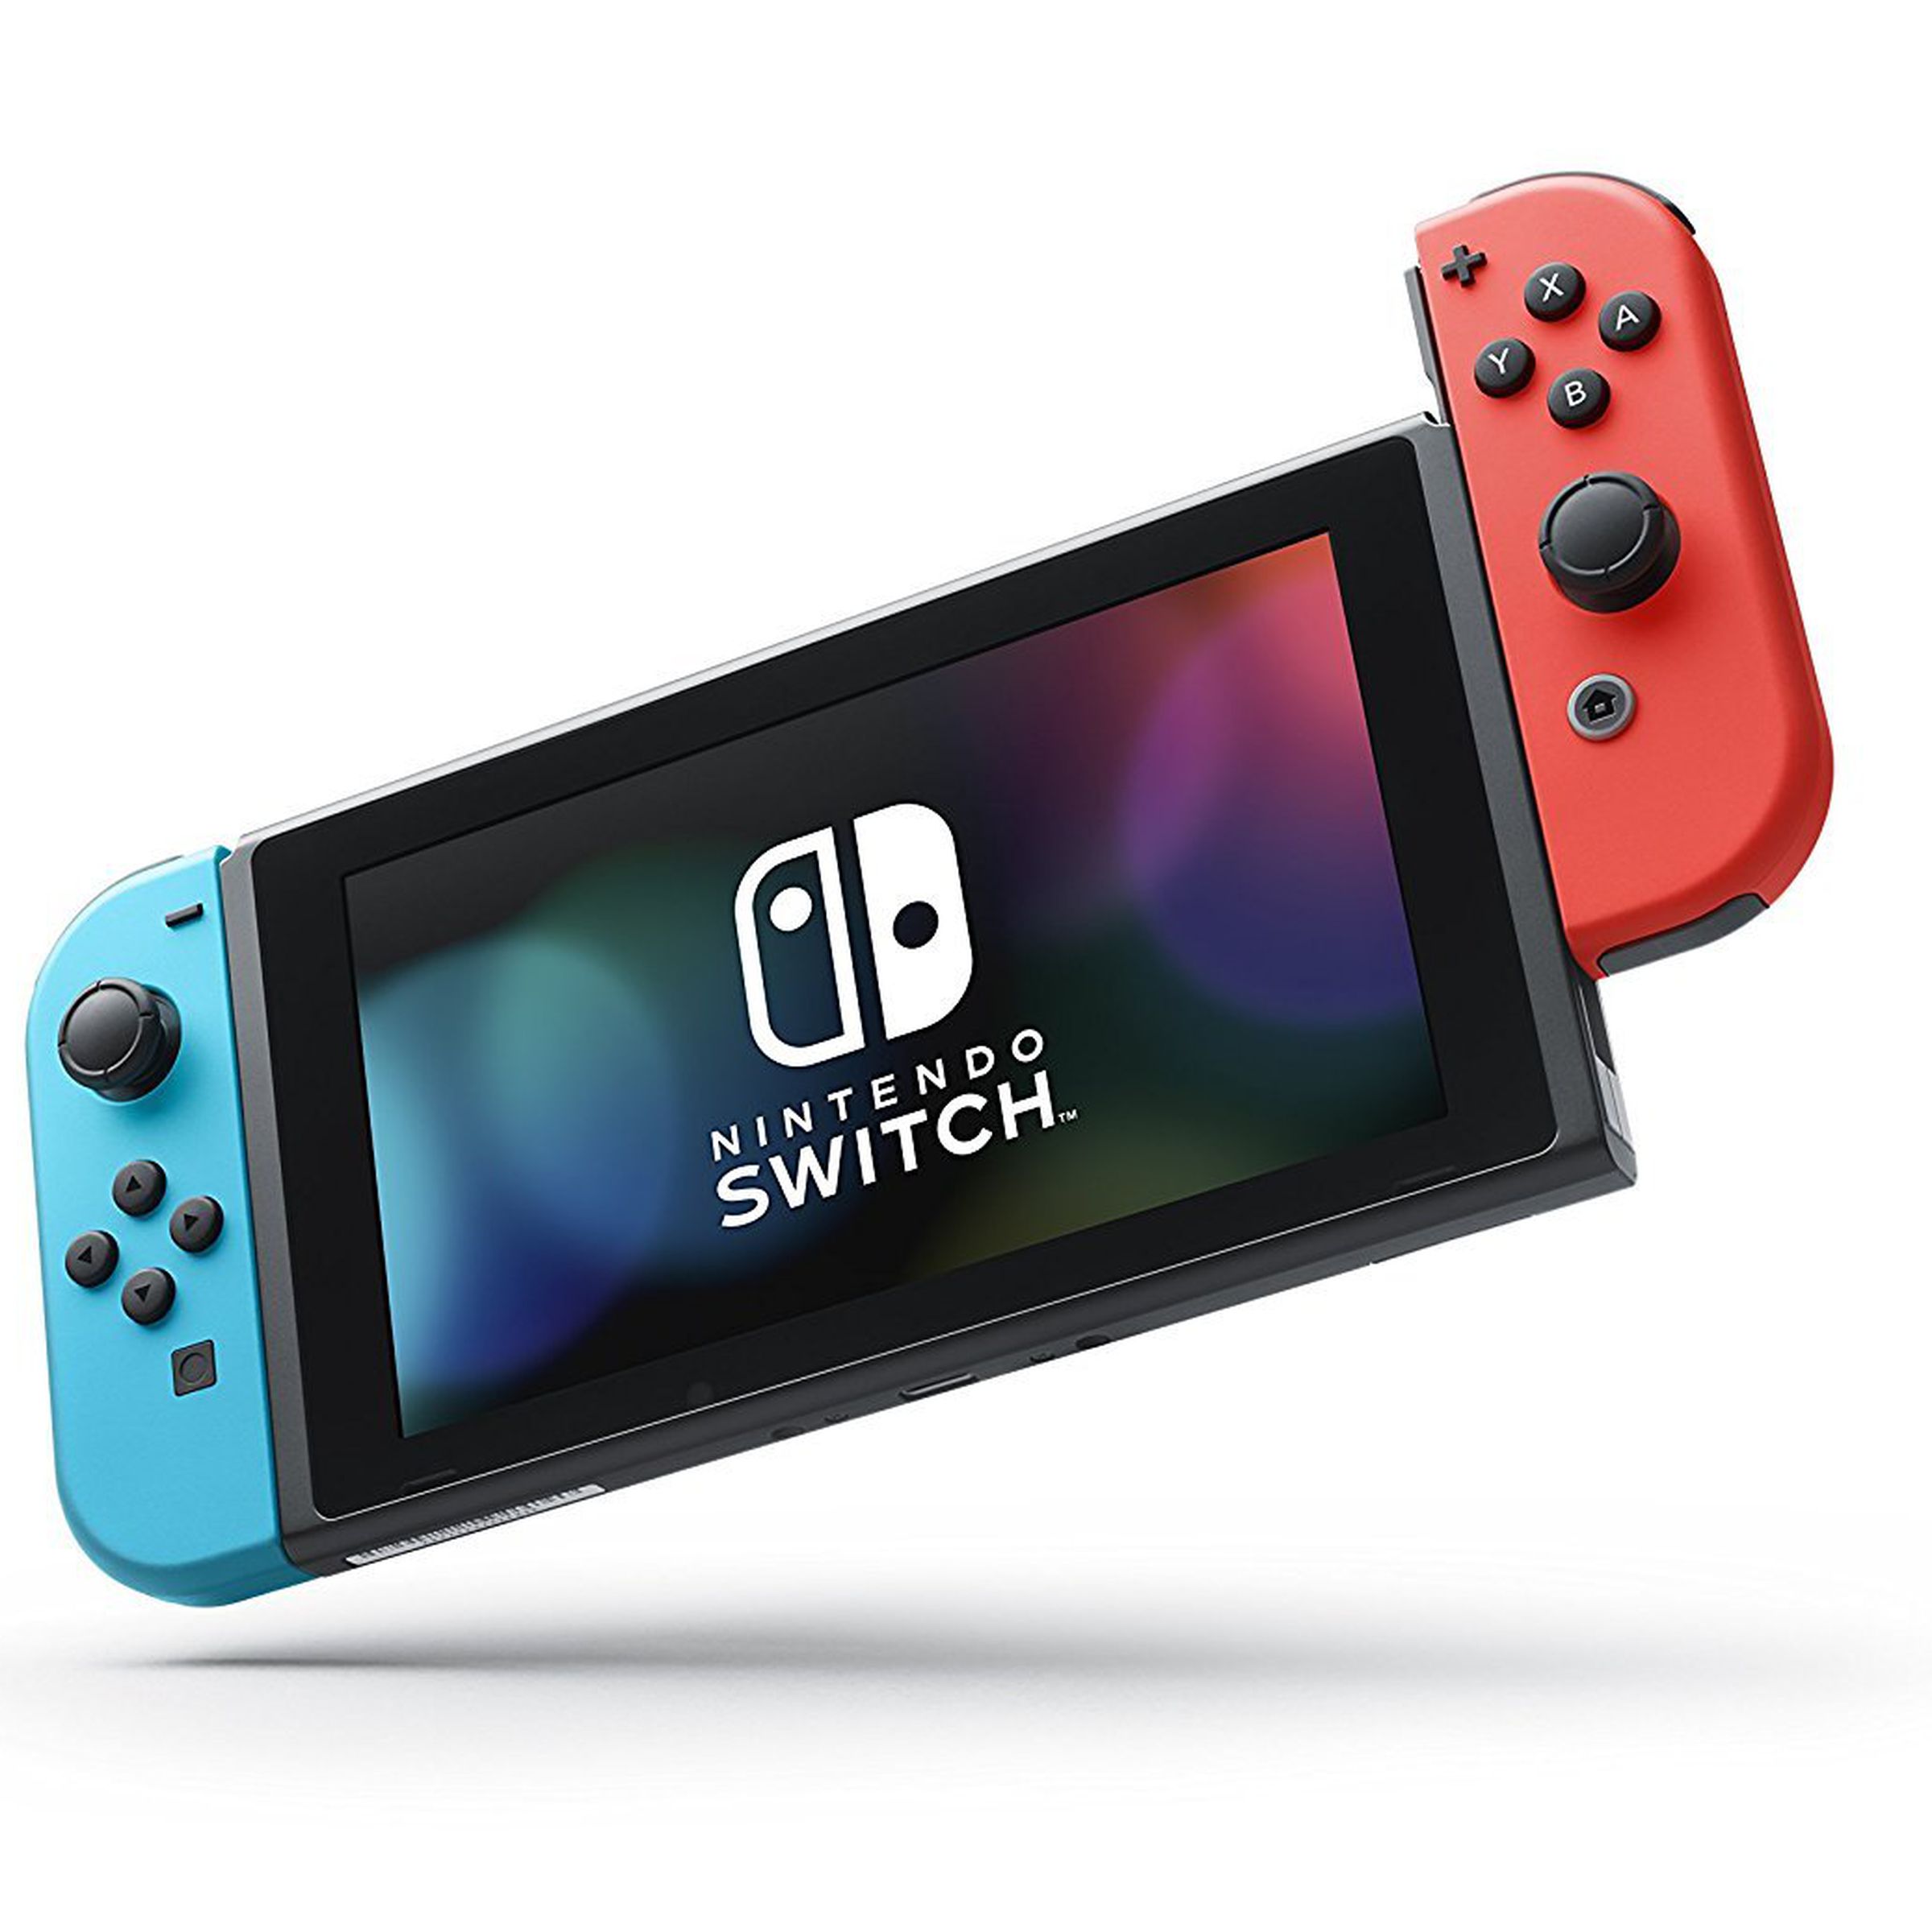 Nintendo switch with blue and red joy-cons.